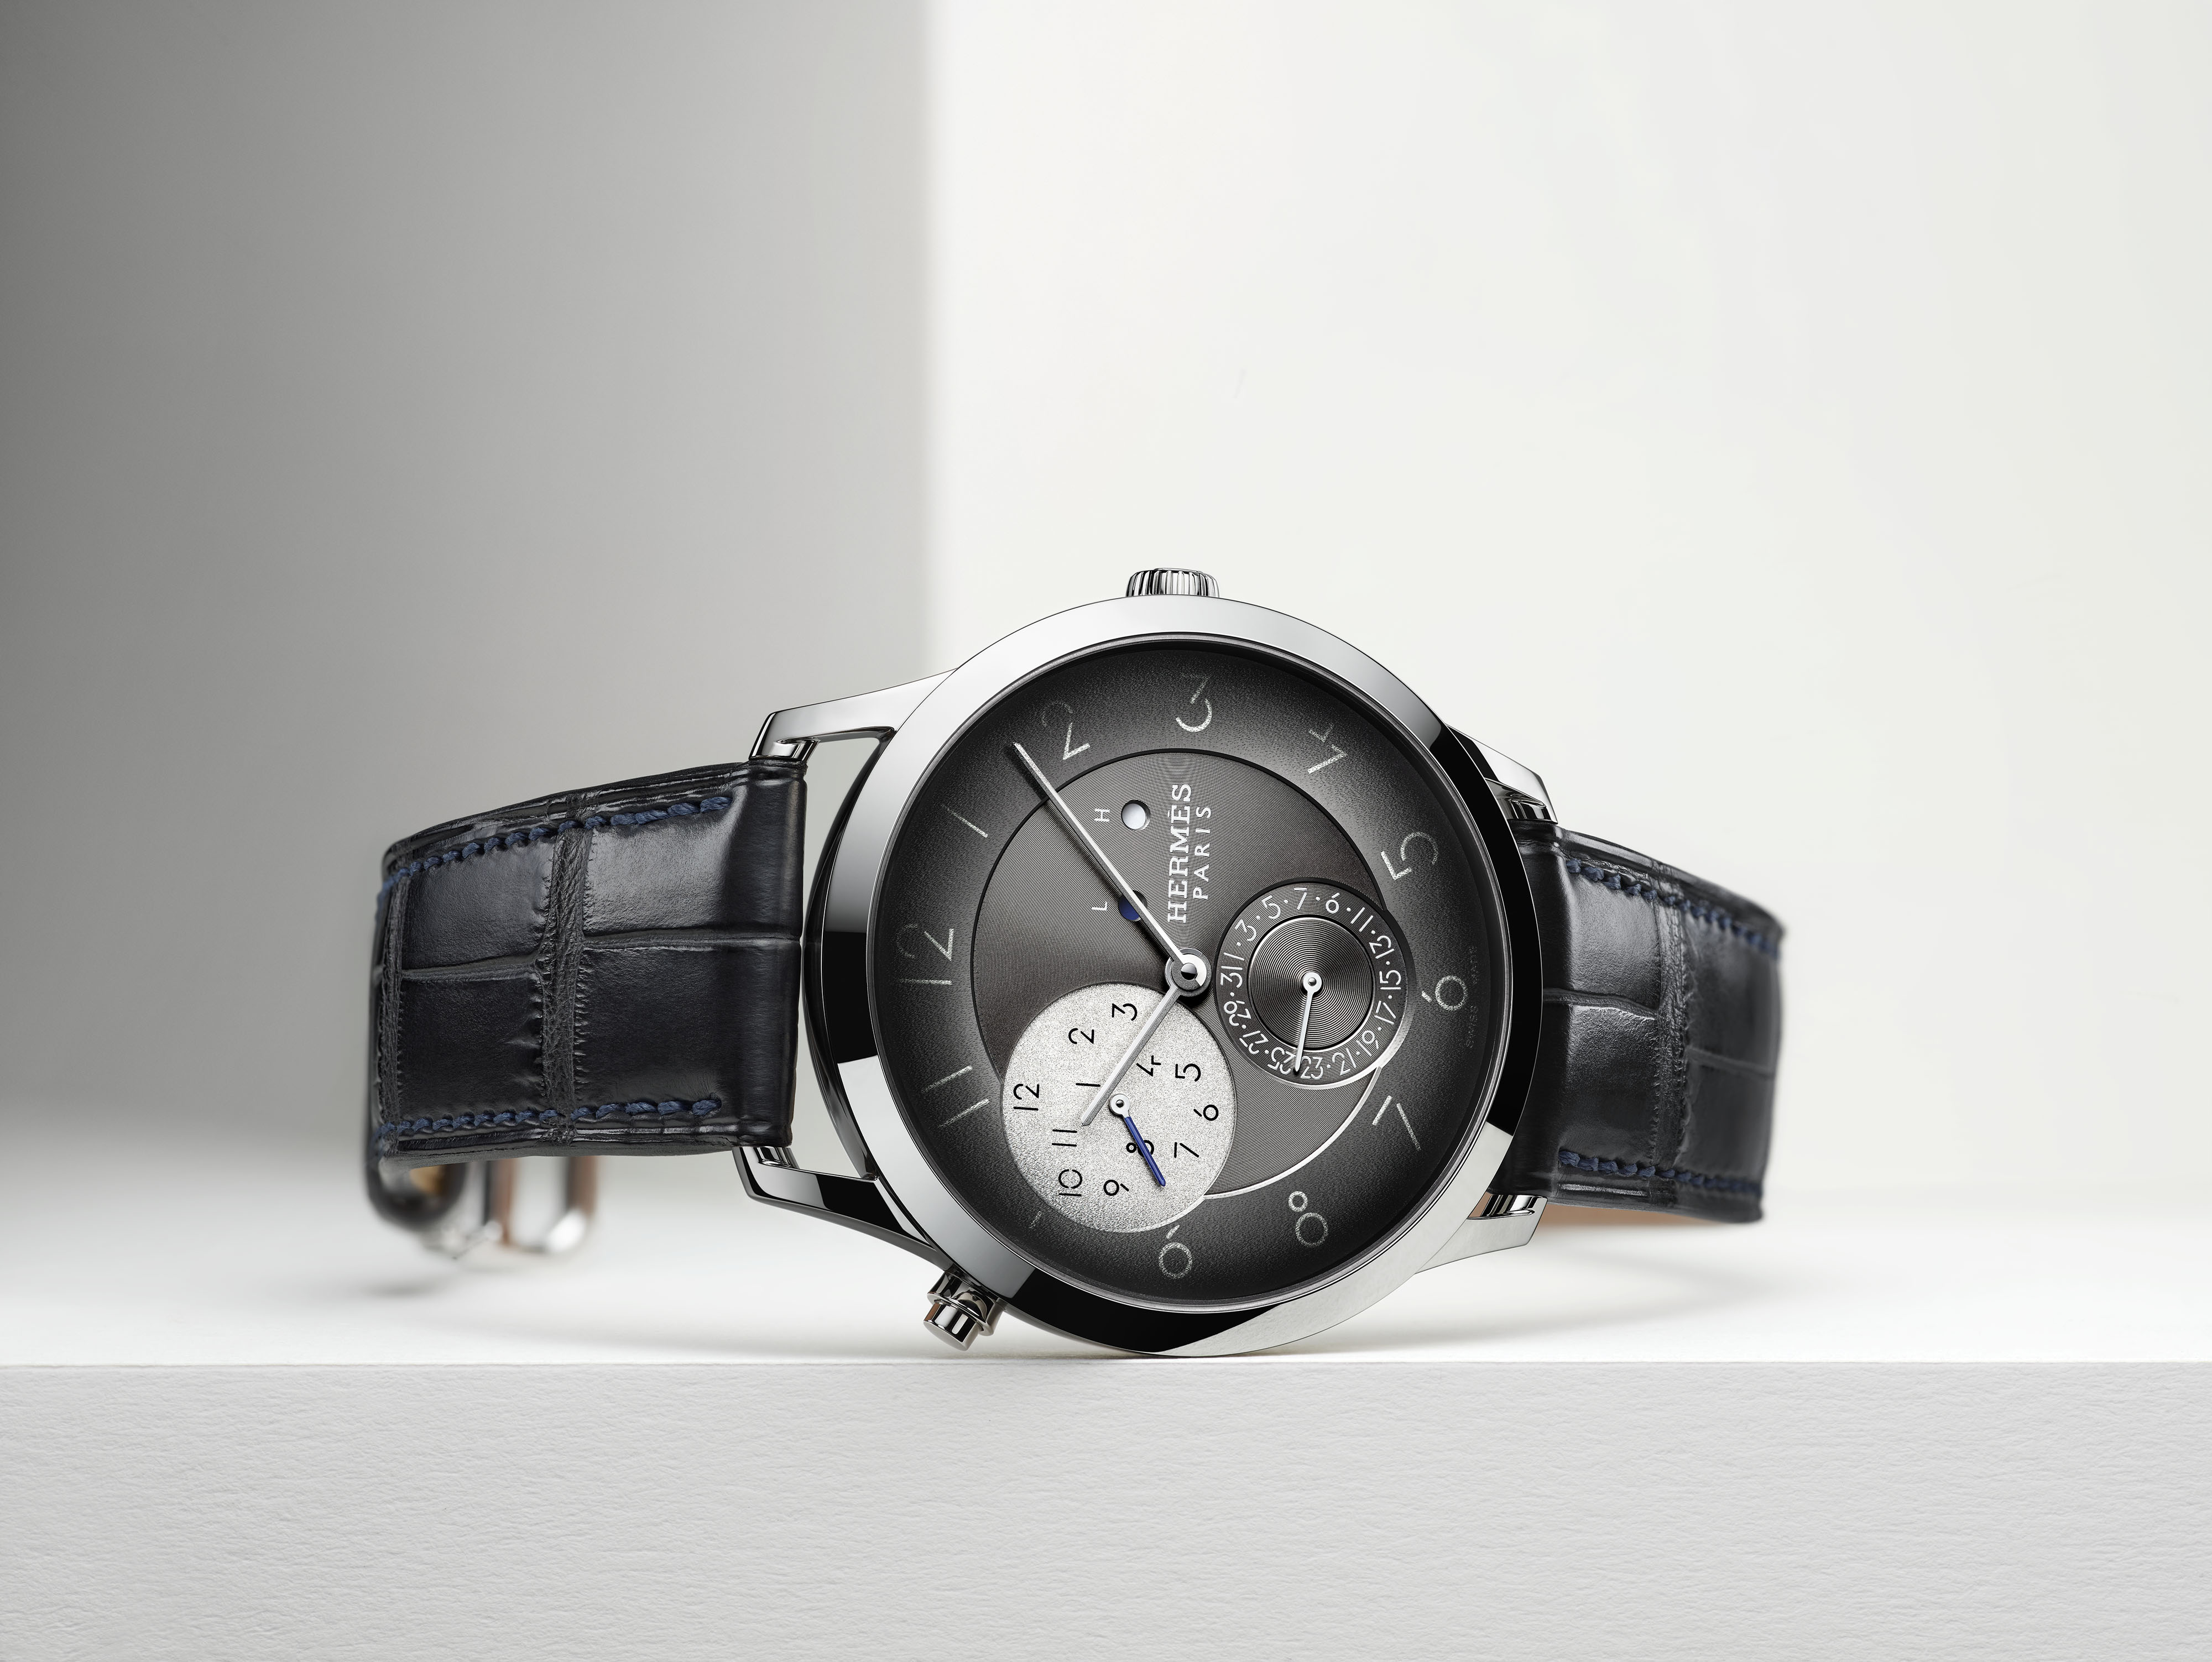 Each Slim d’Hermès GMT is crafted with palladium and an alligator strap